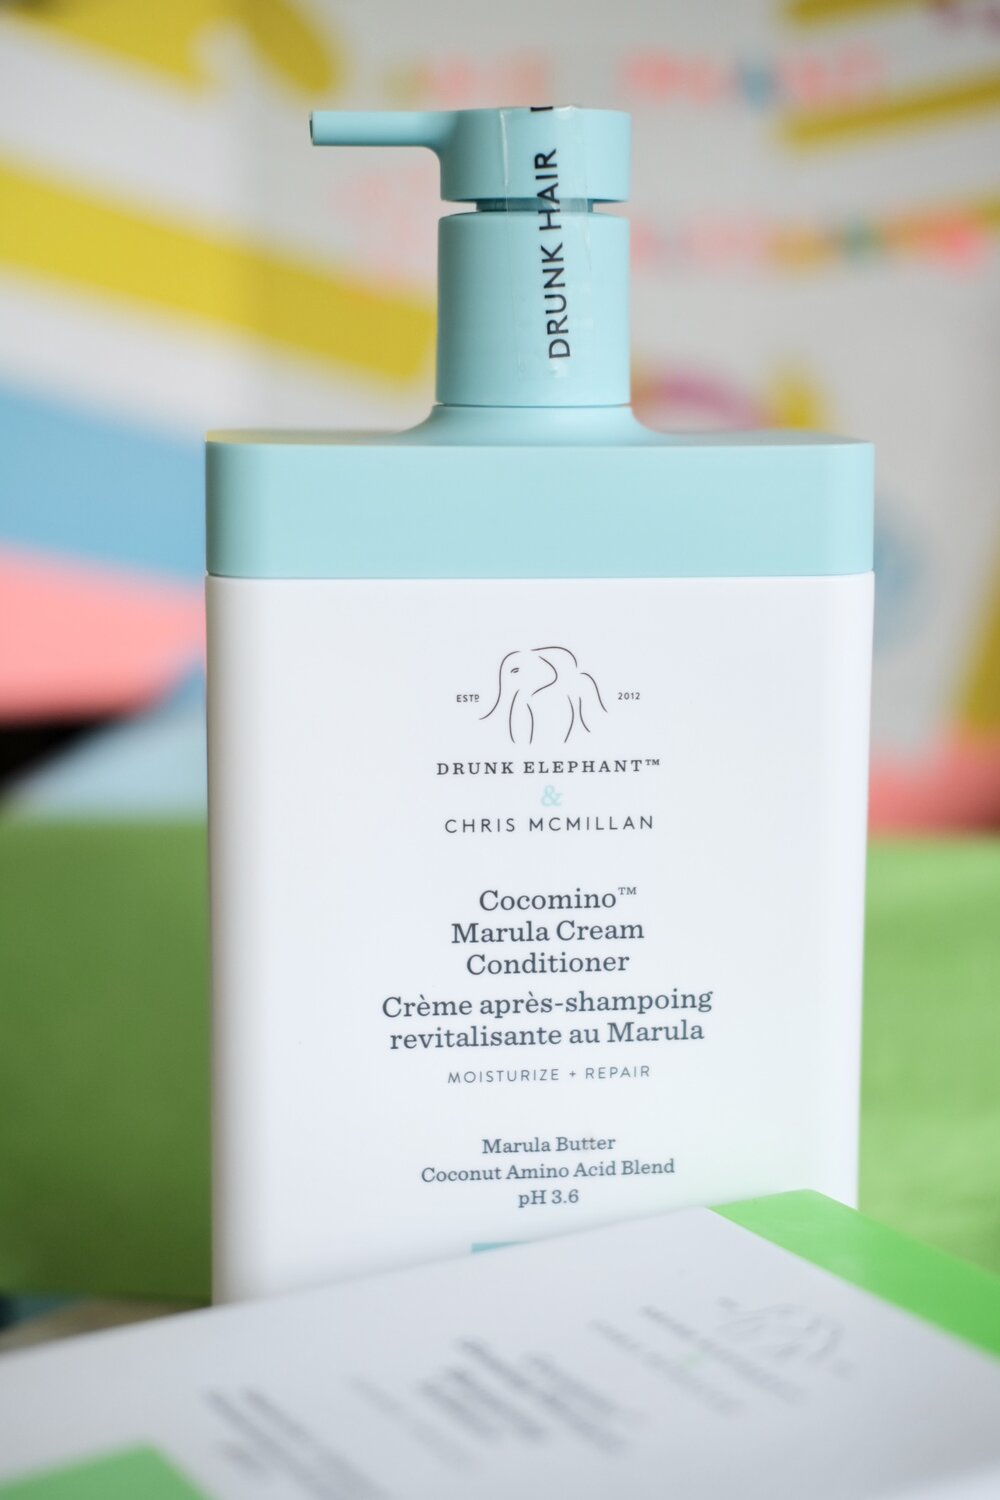 Drunk Elephant Hair Care Review and Drunk Elephant Body Care Review - A  Detailed Drunk Elephant Review 2022 — Lorna Ryan - A San Francisco  Lifestyle Blog sharing top finds